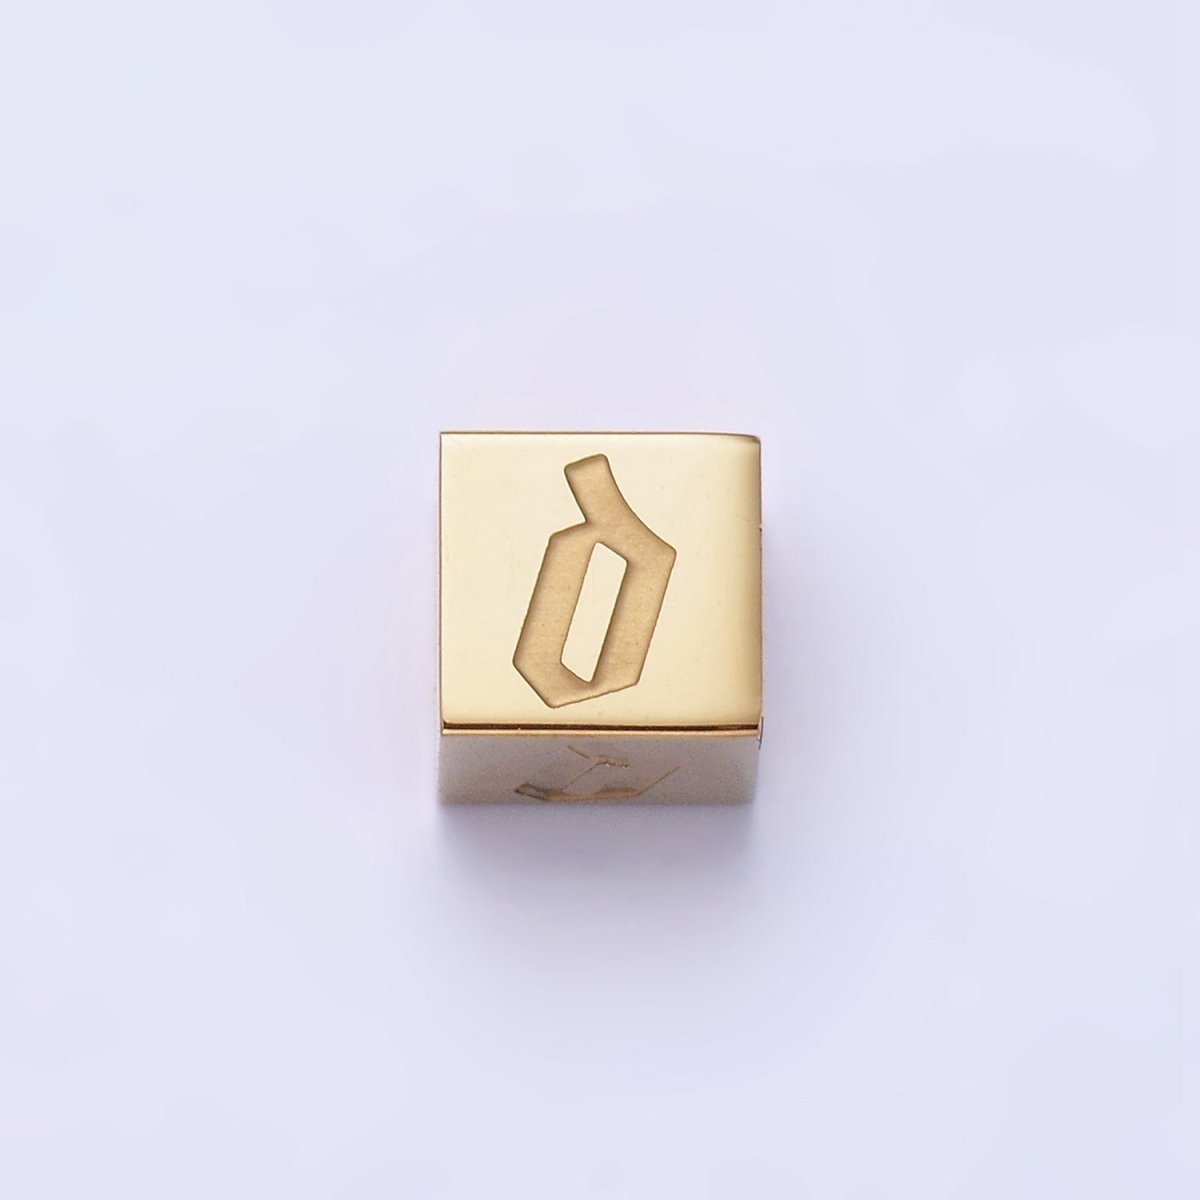 Stainless Steel Initial Letter A-Z Old English Gothic Alphabet Font 5mm Gold Bead | A937 - A962 - DLUXCA